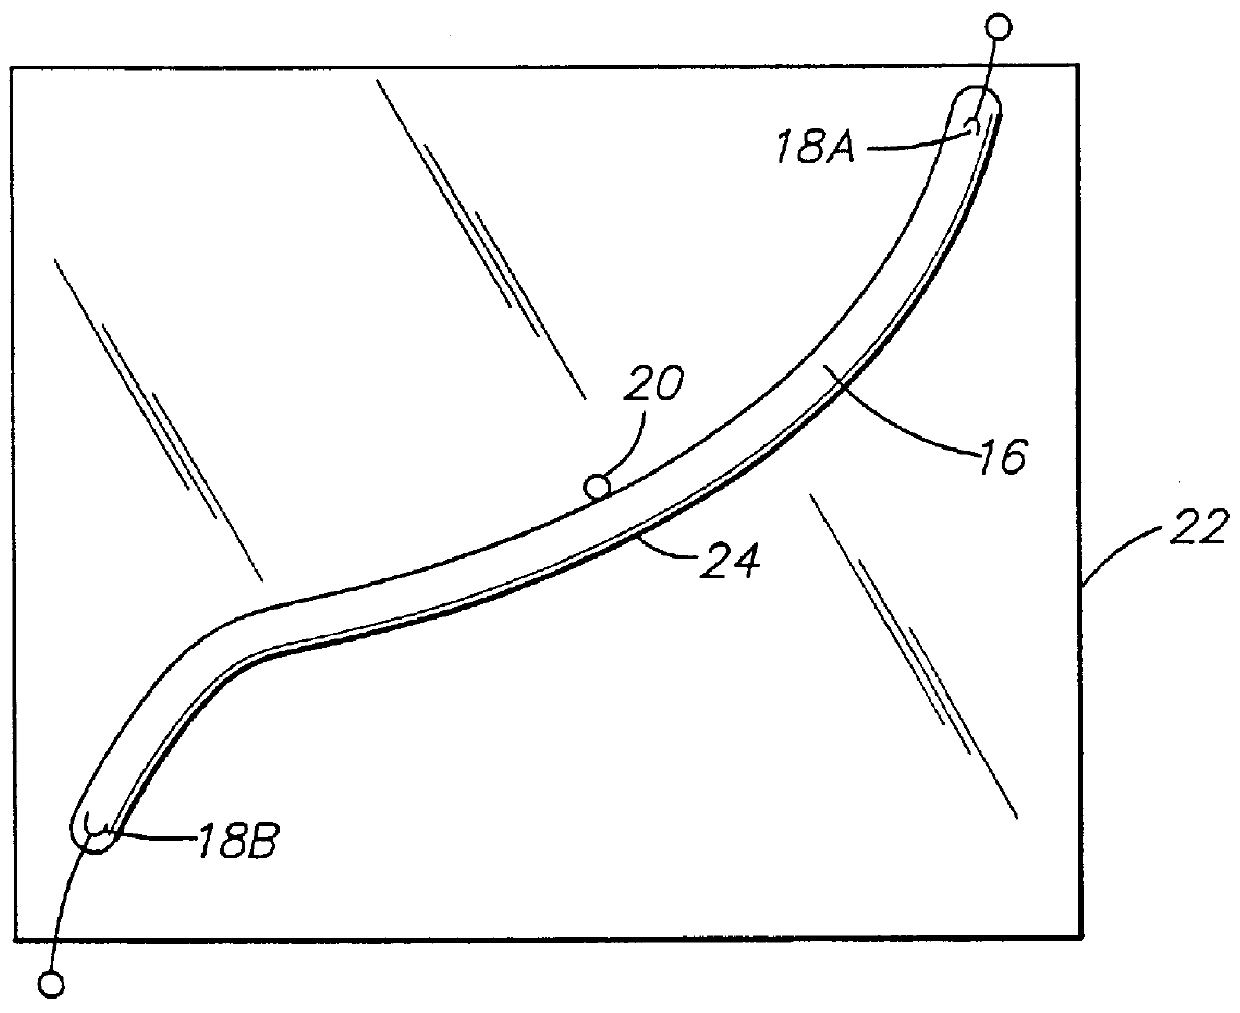 Apparatus and method for detecting ground fault